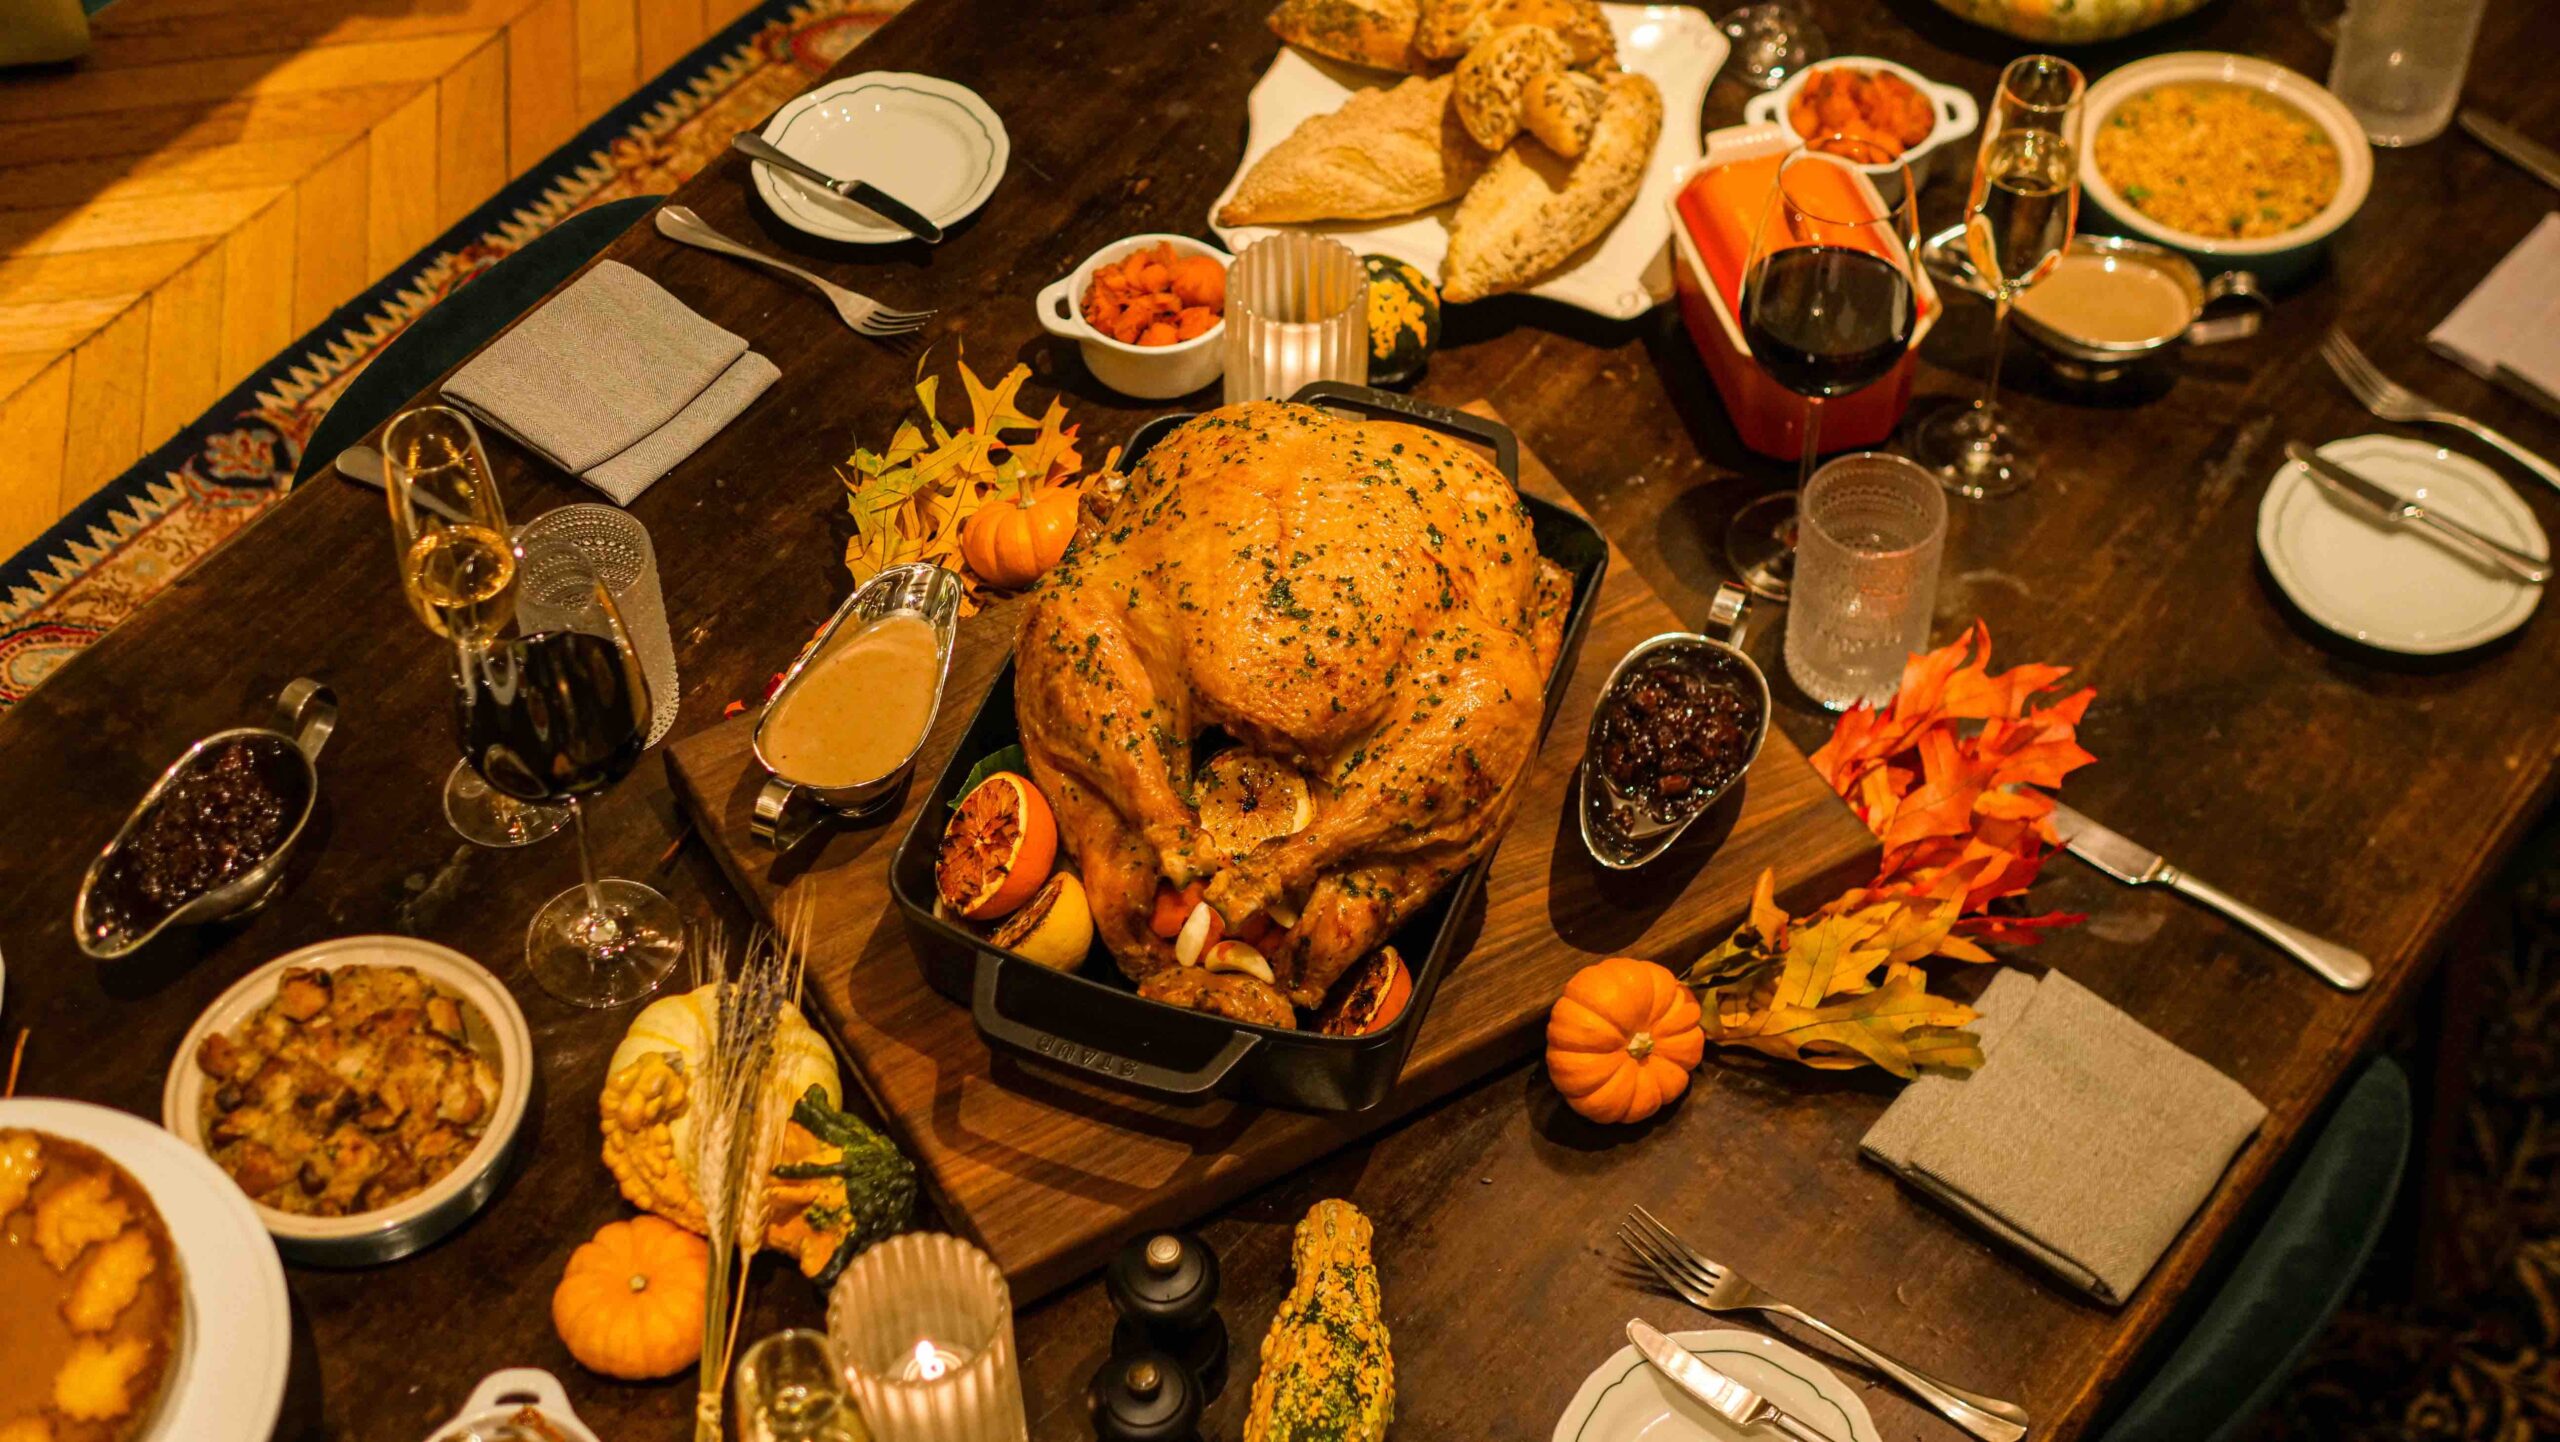 An image of the Fairmont Century Plaza’s Thanksgiving Feast To-Go.